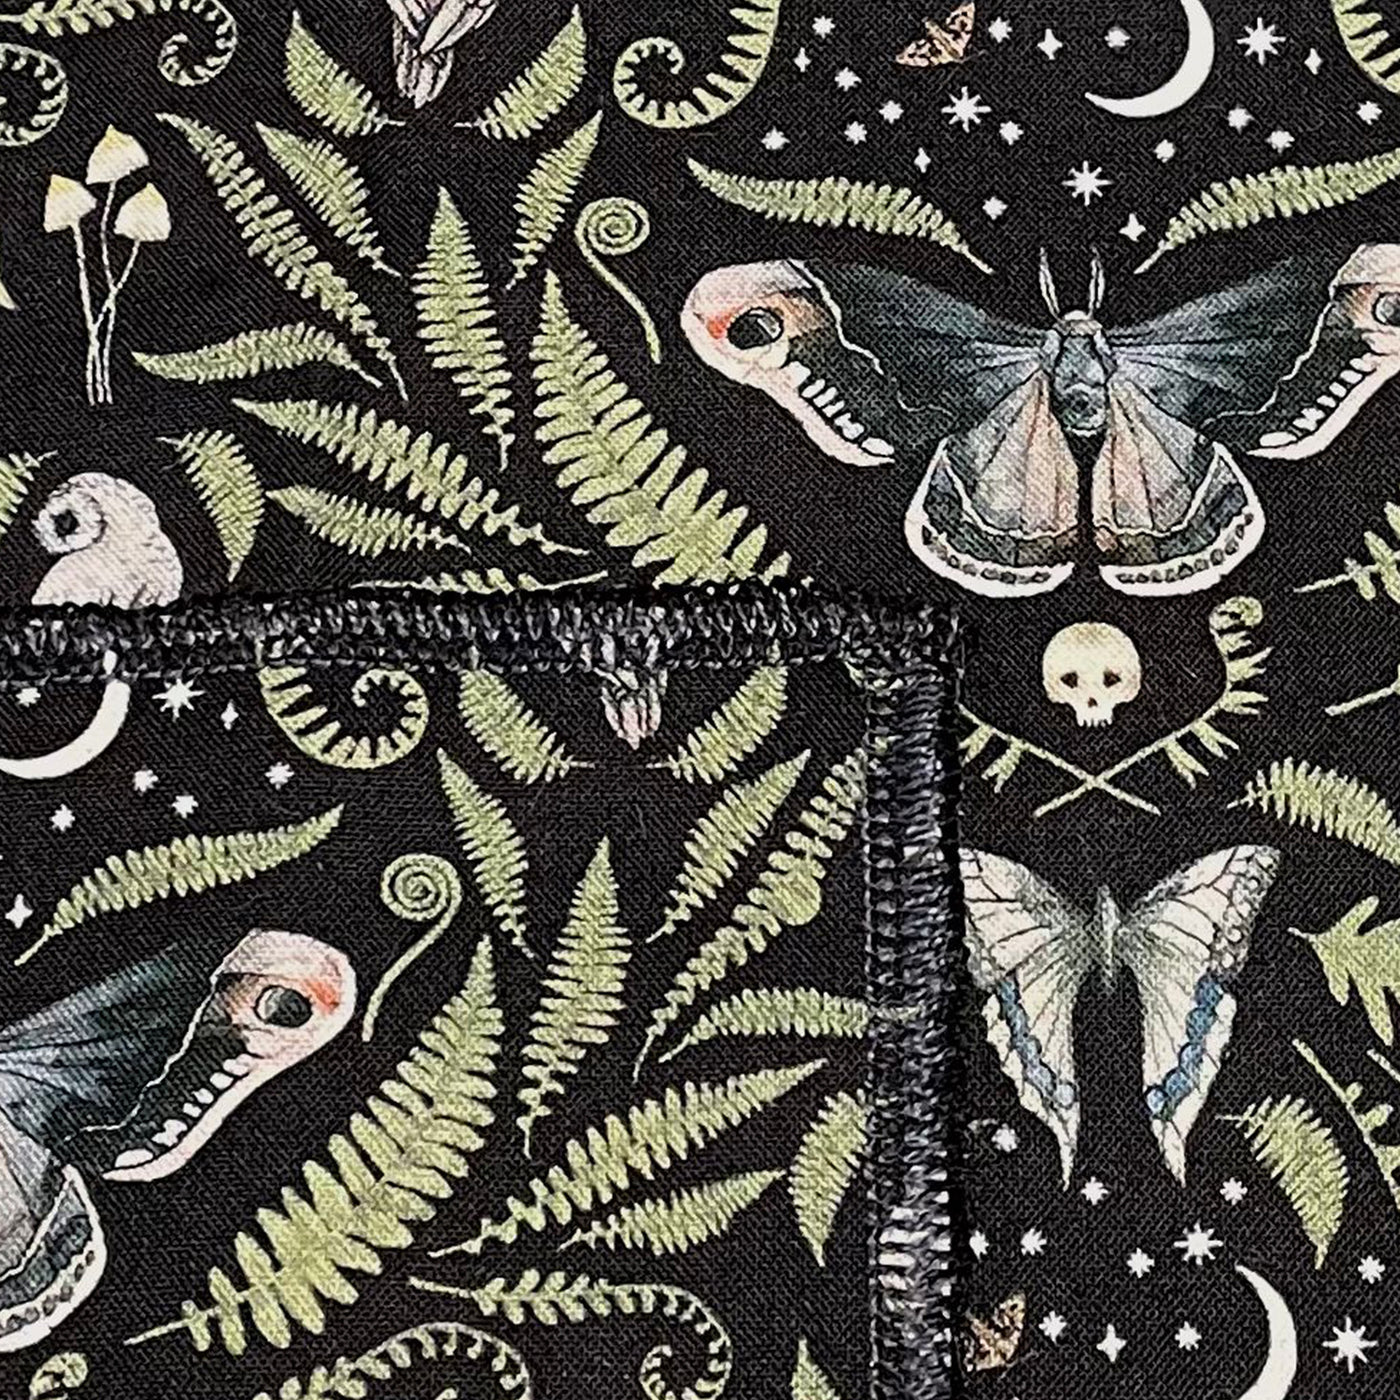 Handmade Square Bandana with an awesome design with death's head hawk moth, skulls, butterflies, owls, moons & ferns a predominantly green design on black 100% cotton